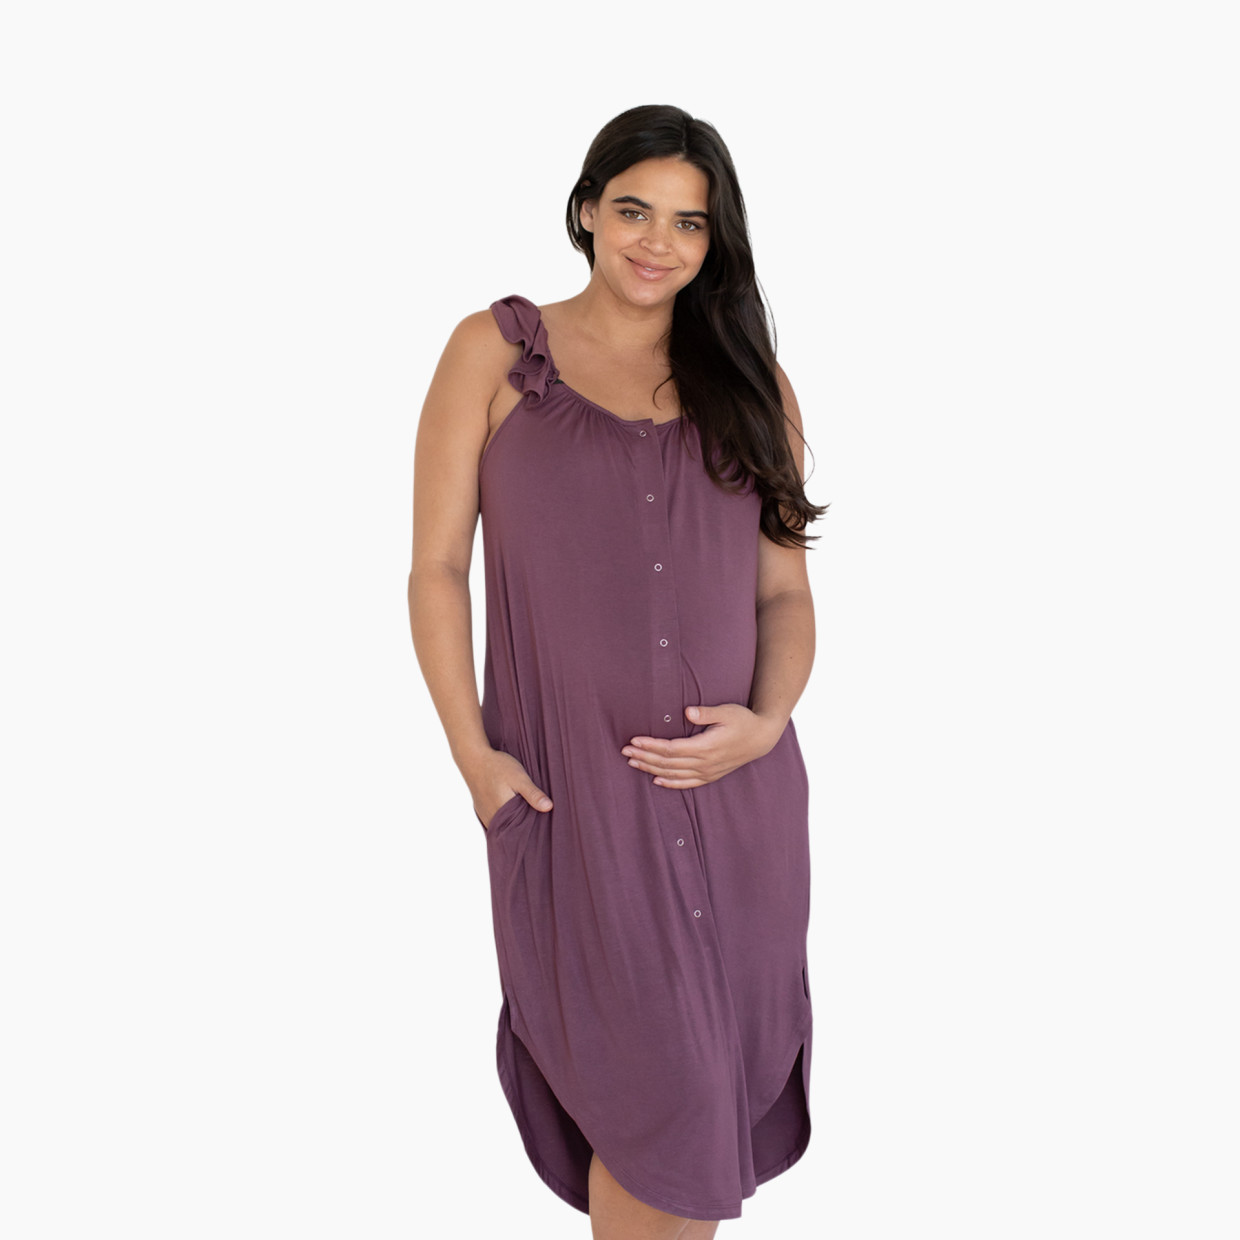 Buy Kindred Bravely Ruffle Strap Labor & Delivery Gown, Burgundy Plum,  Medium-Large at